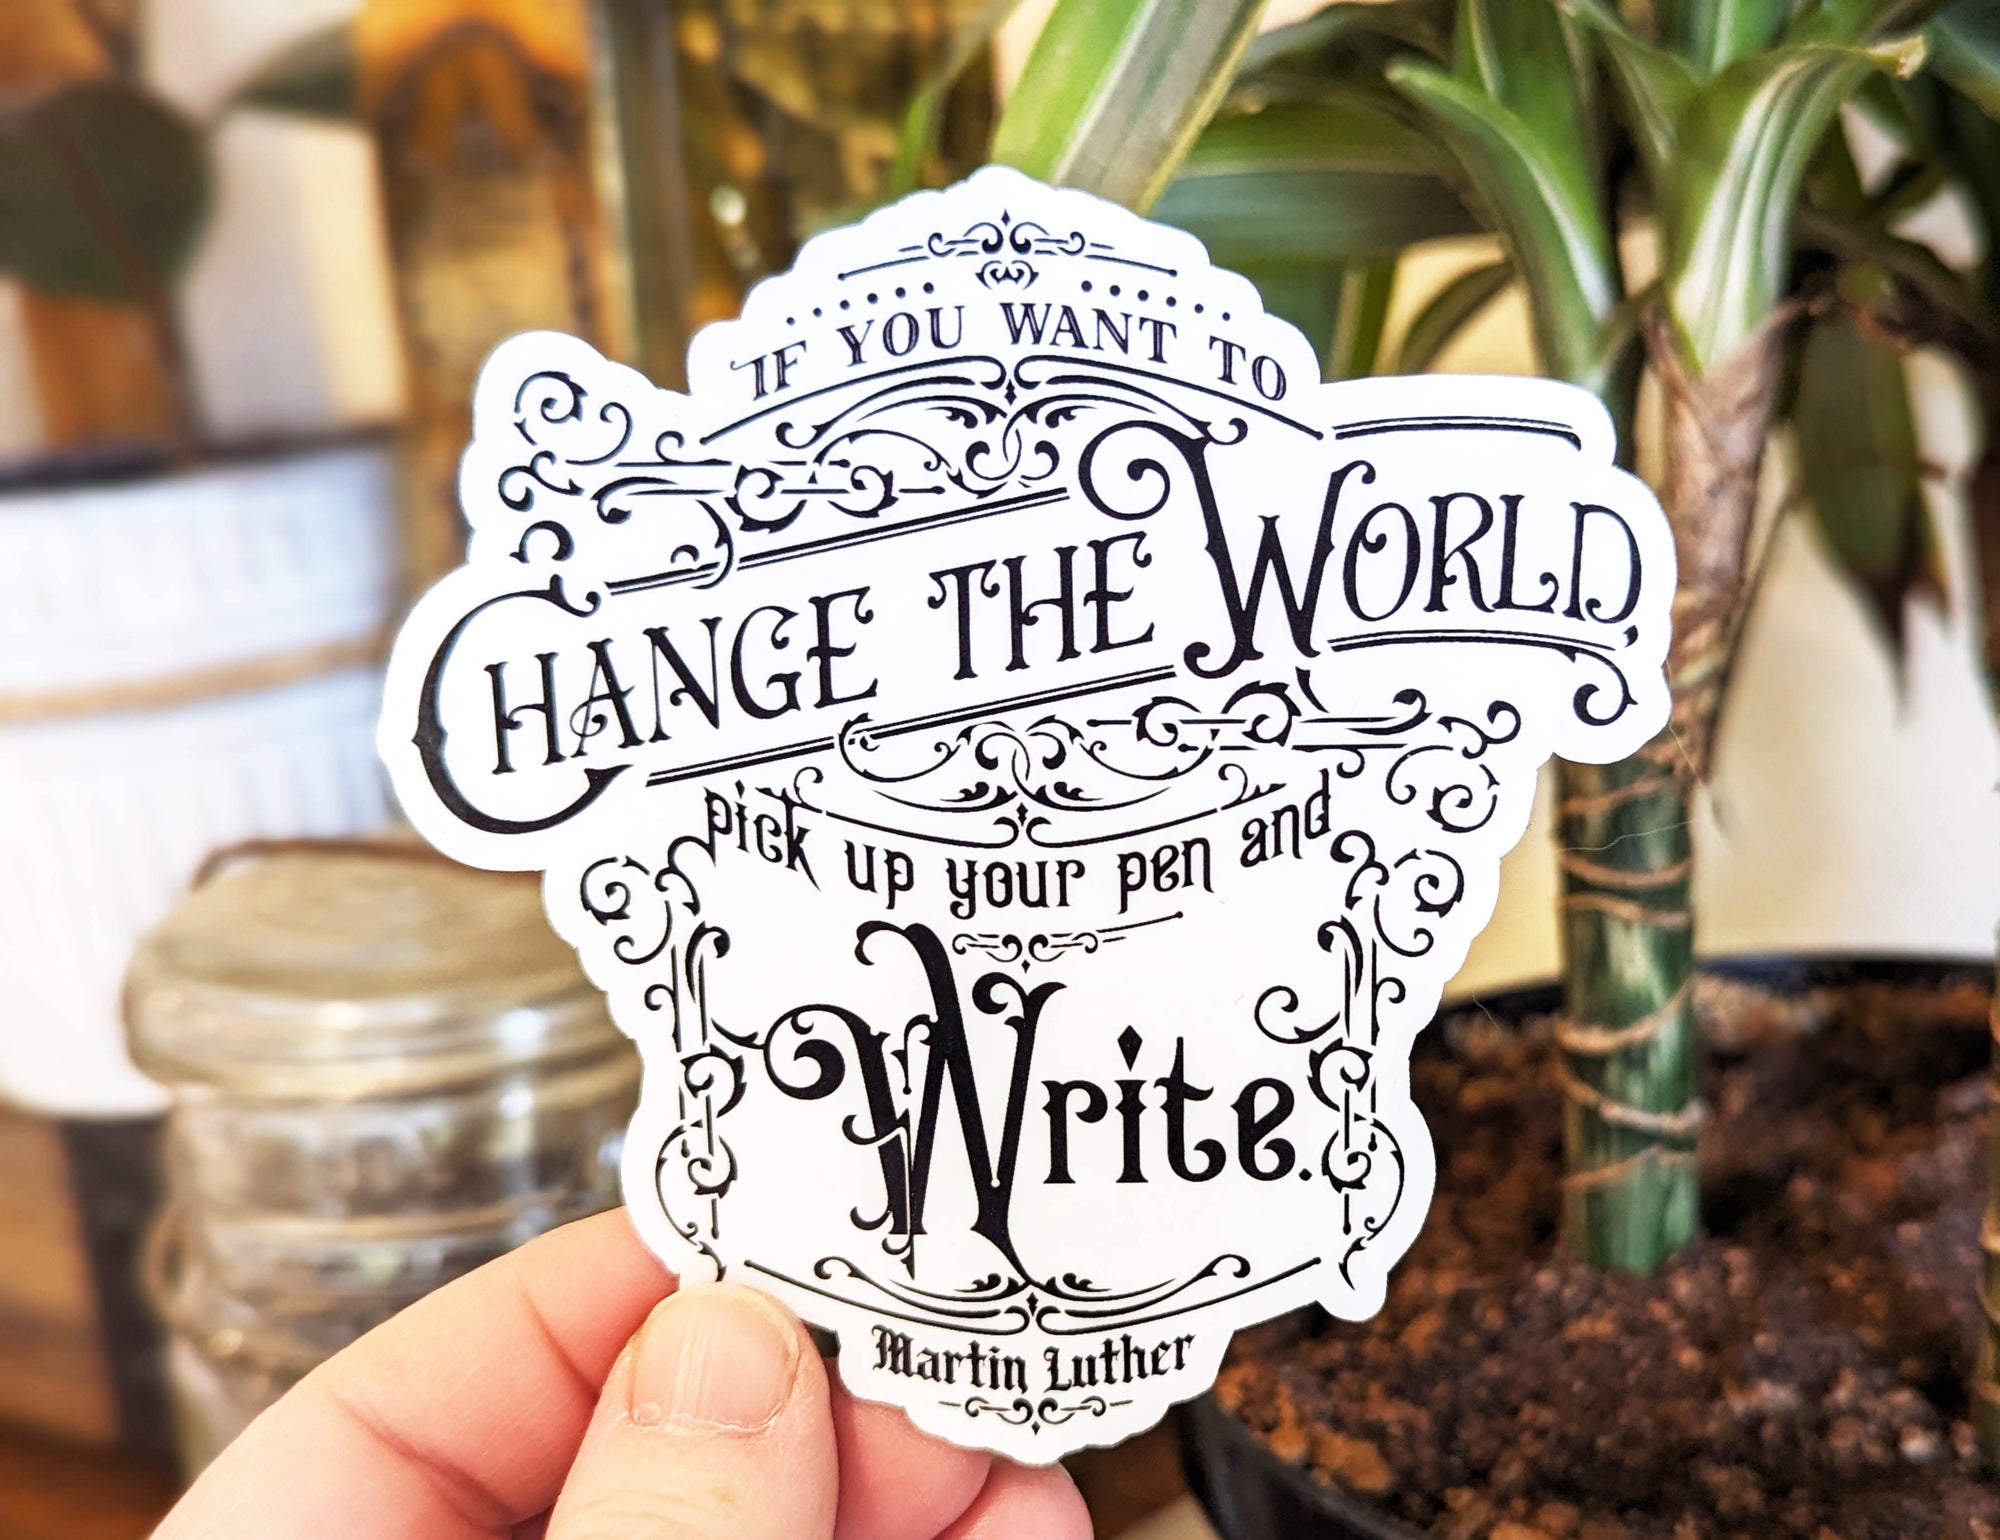 Martin Luther "Pick up your pen and write" Sticker